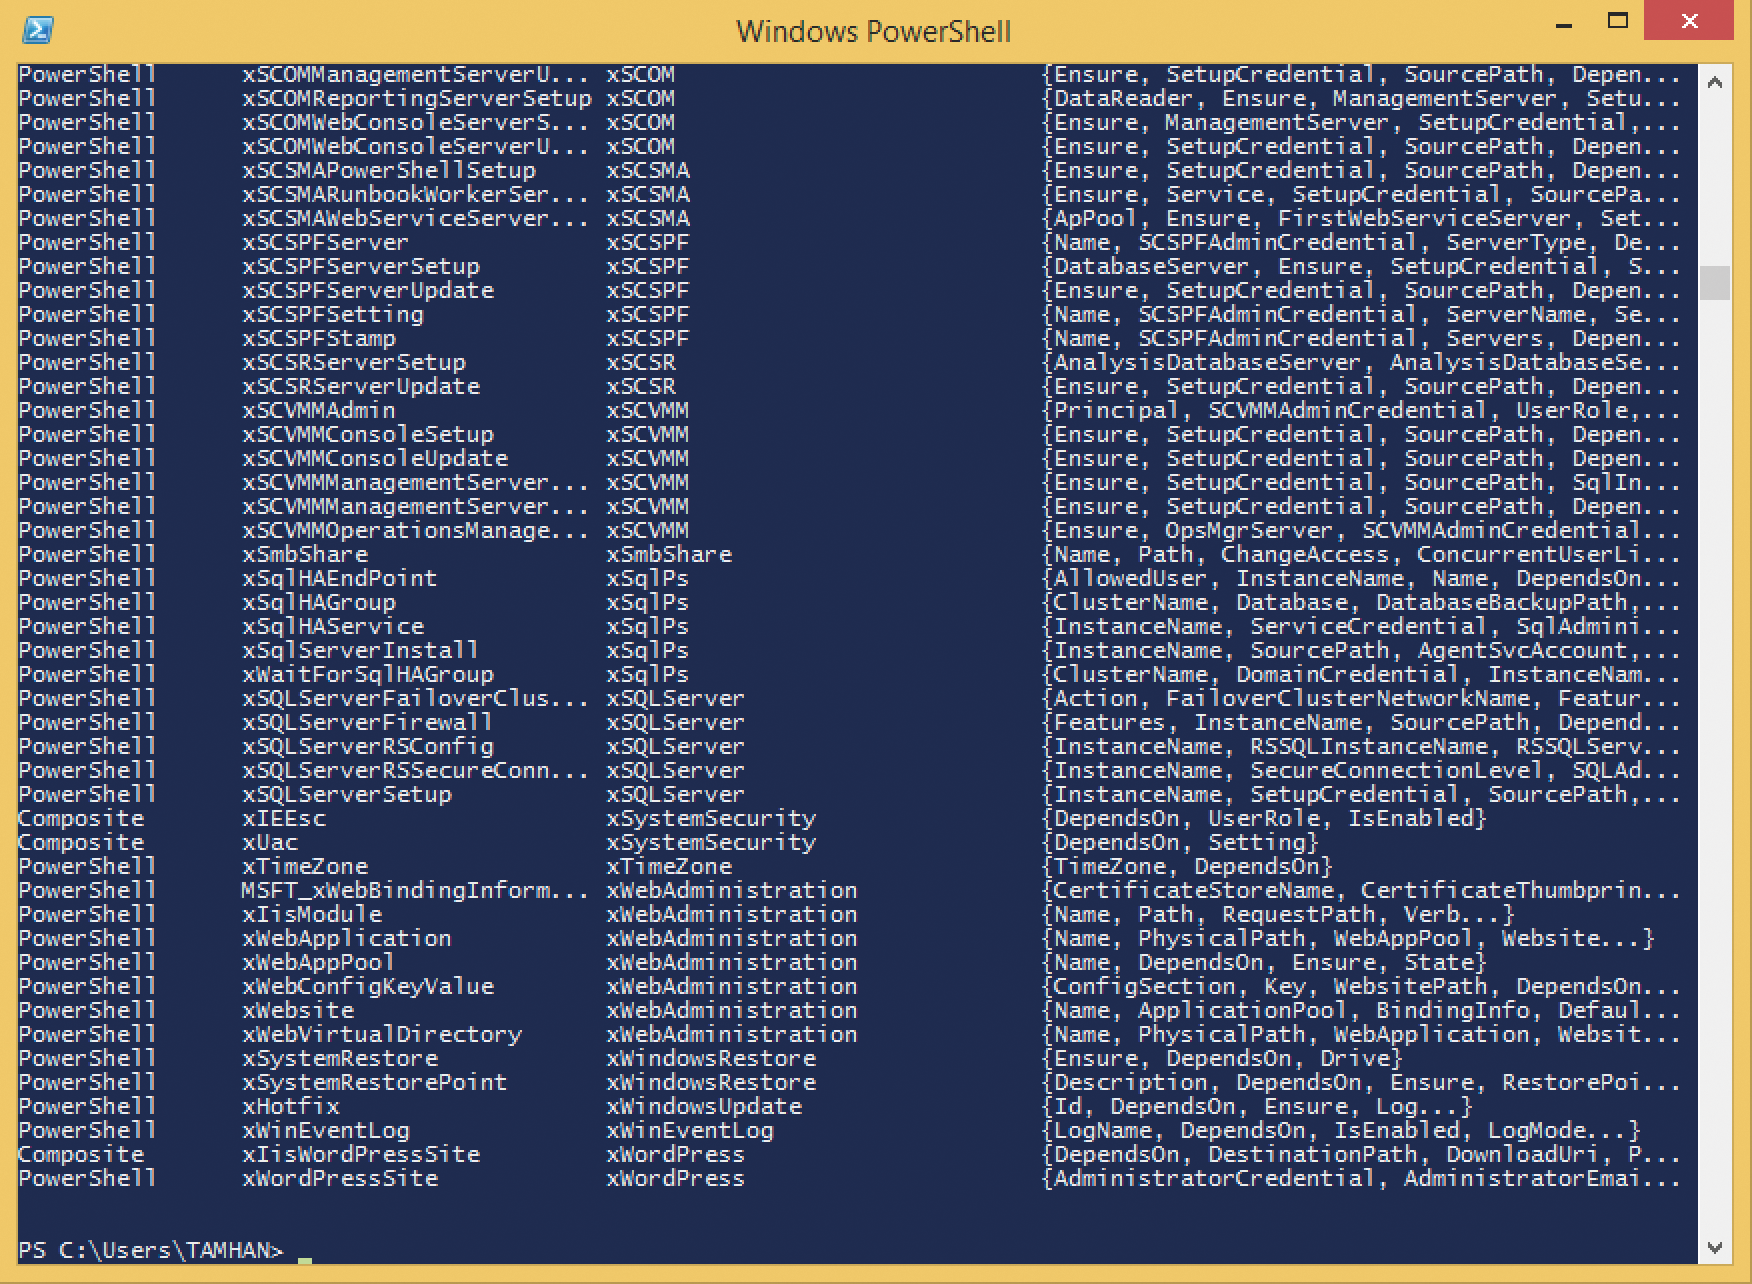 The DSC Resource Kit includes dozens of status elements for PowerShell. 